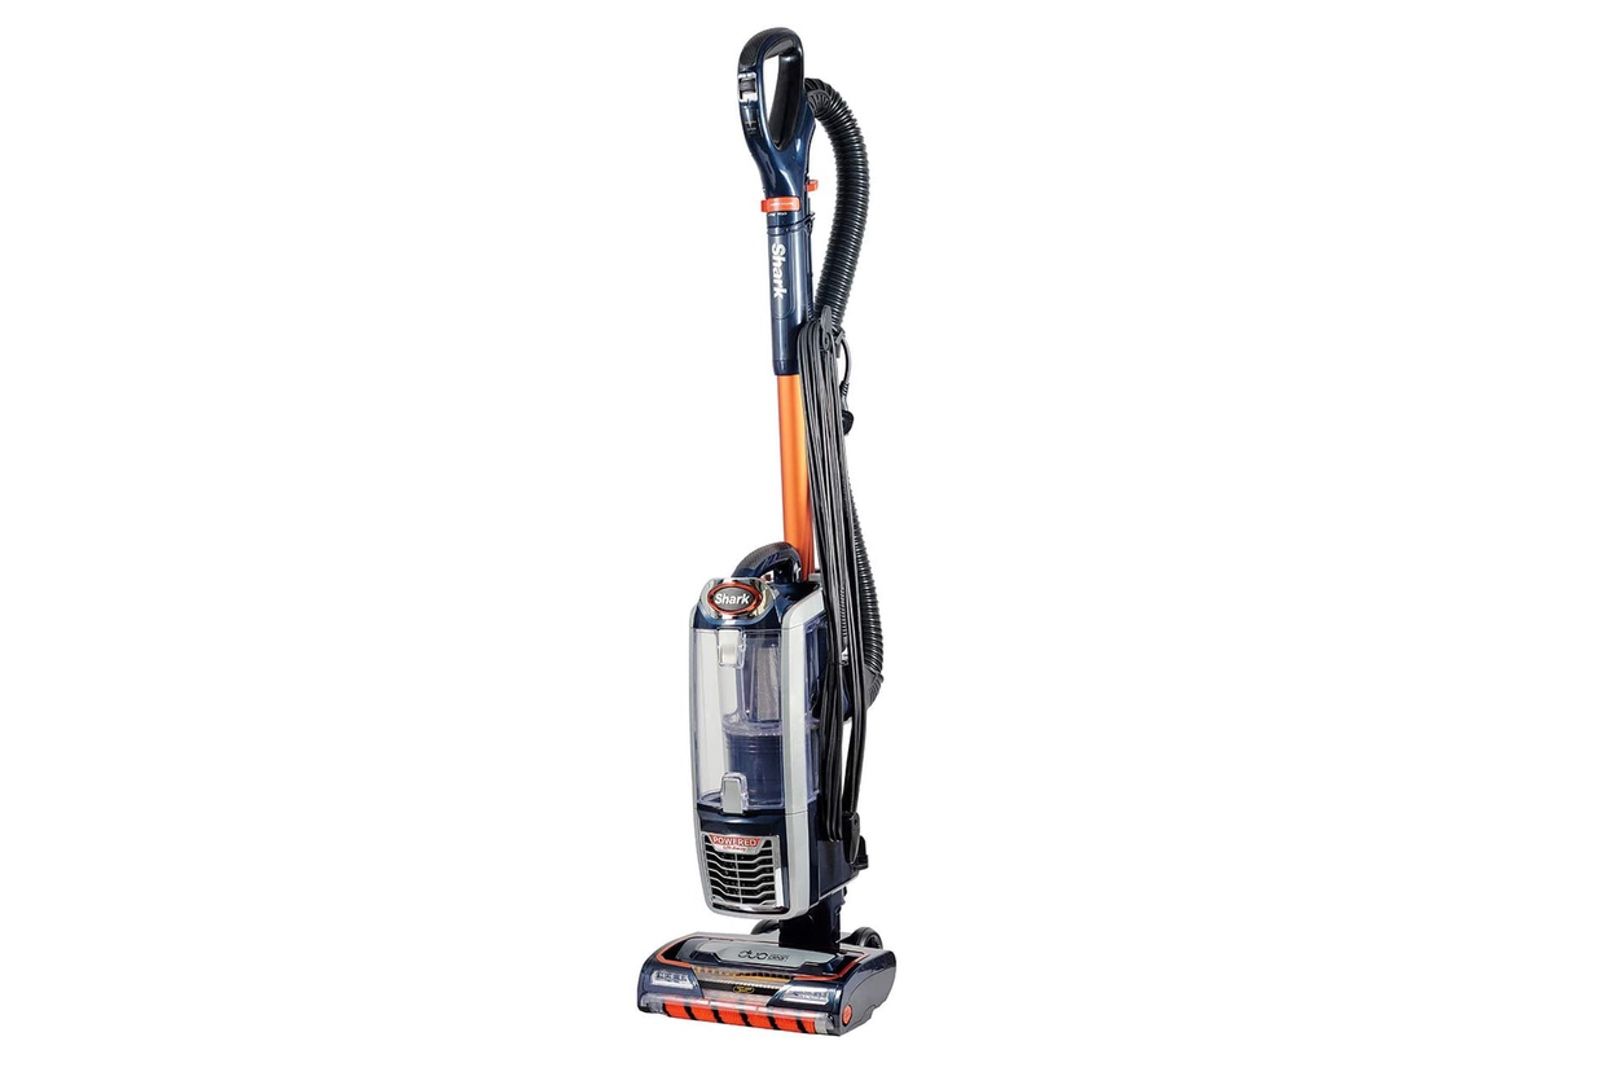 Best upright vacuum cleaner for 2020 image 2